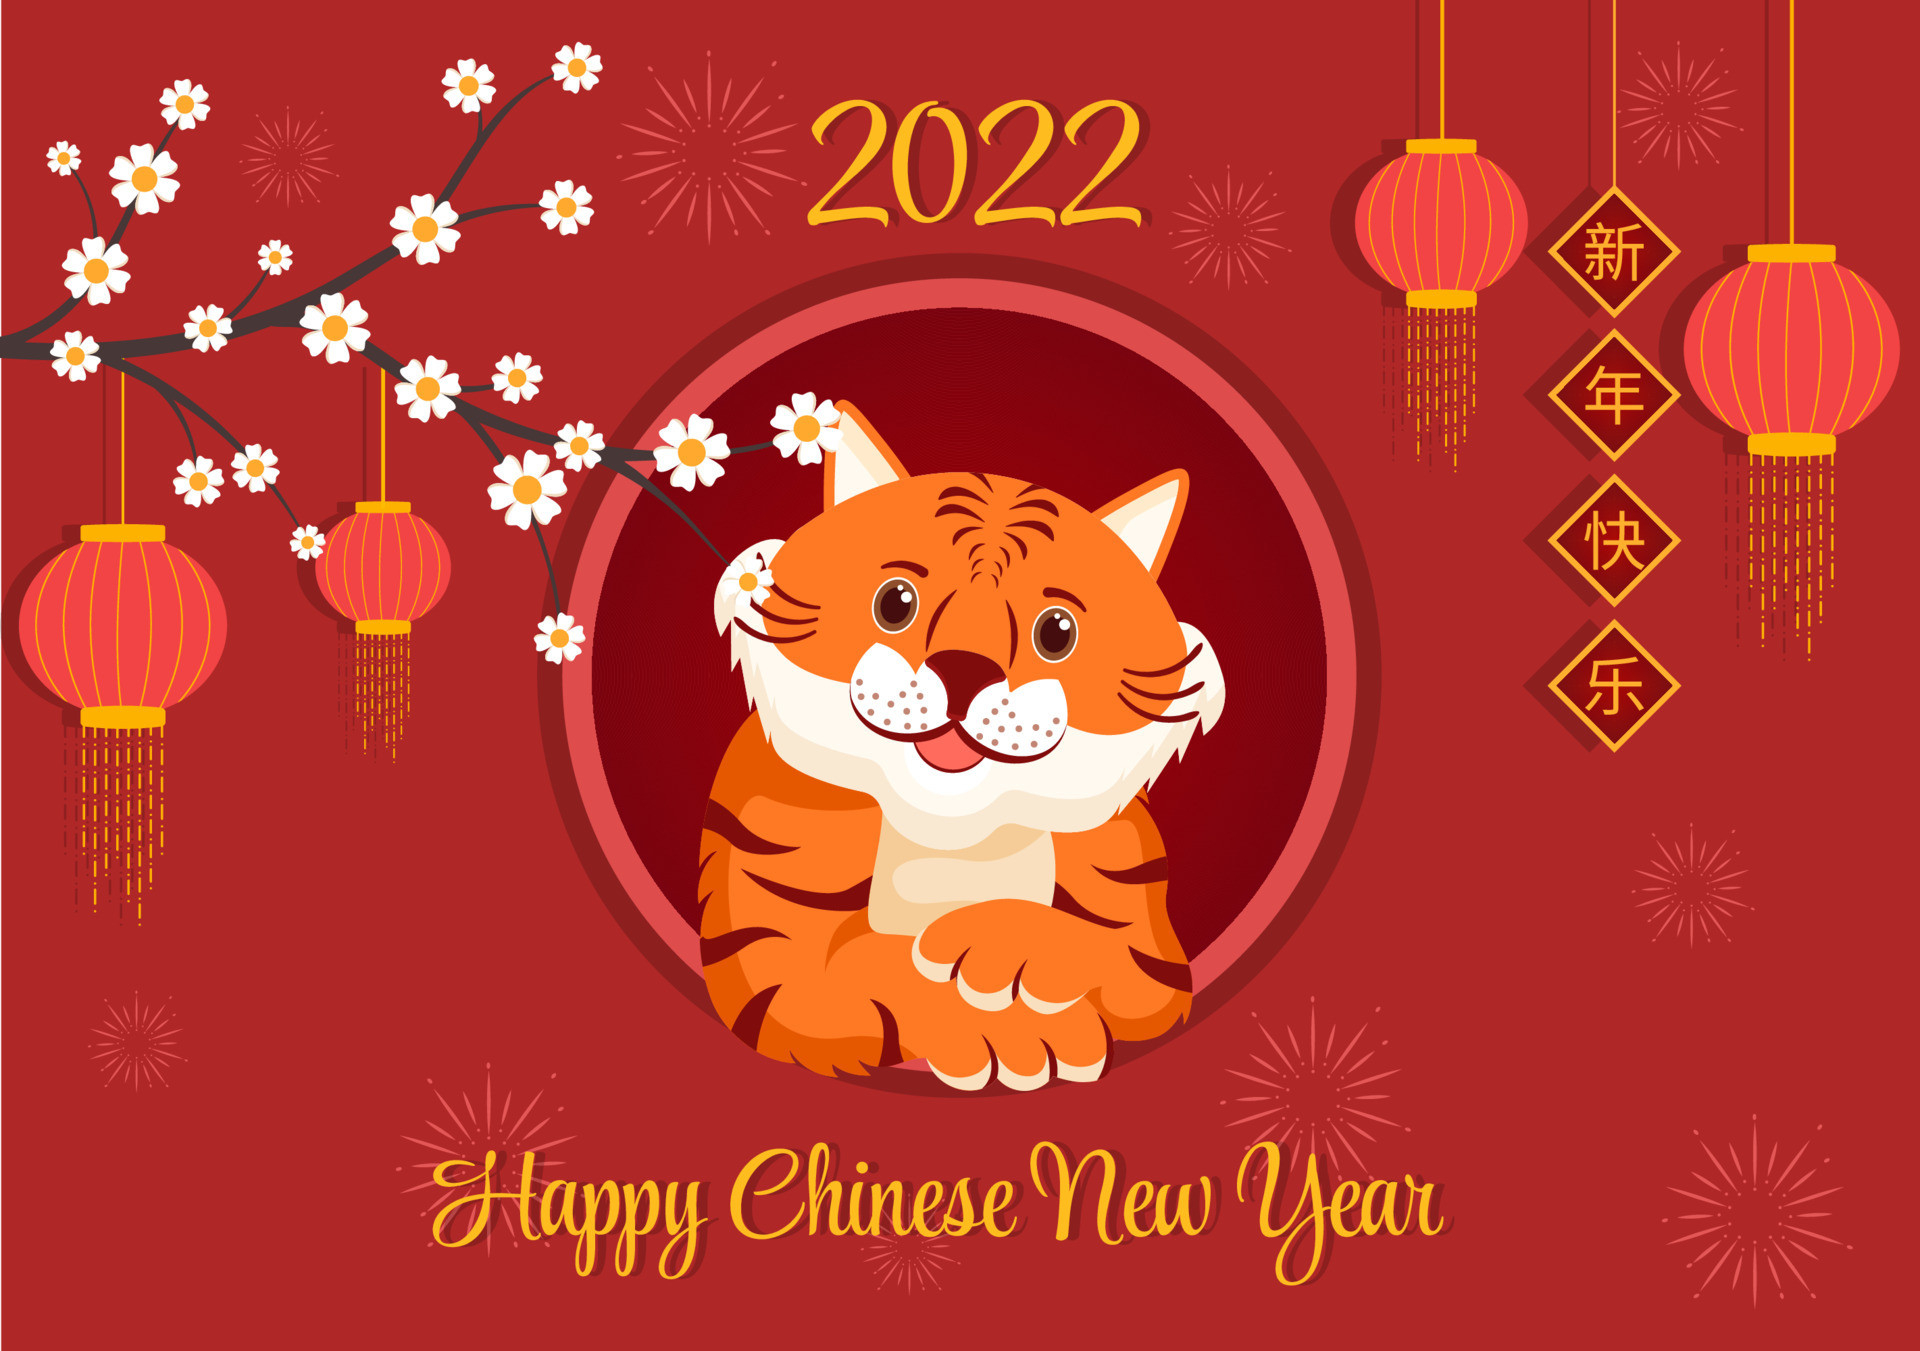 Happy Chinese New Year 2022 With Zodiac Cute Tiger And Flower On Red-Calendar 2022 Chinese New Year